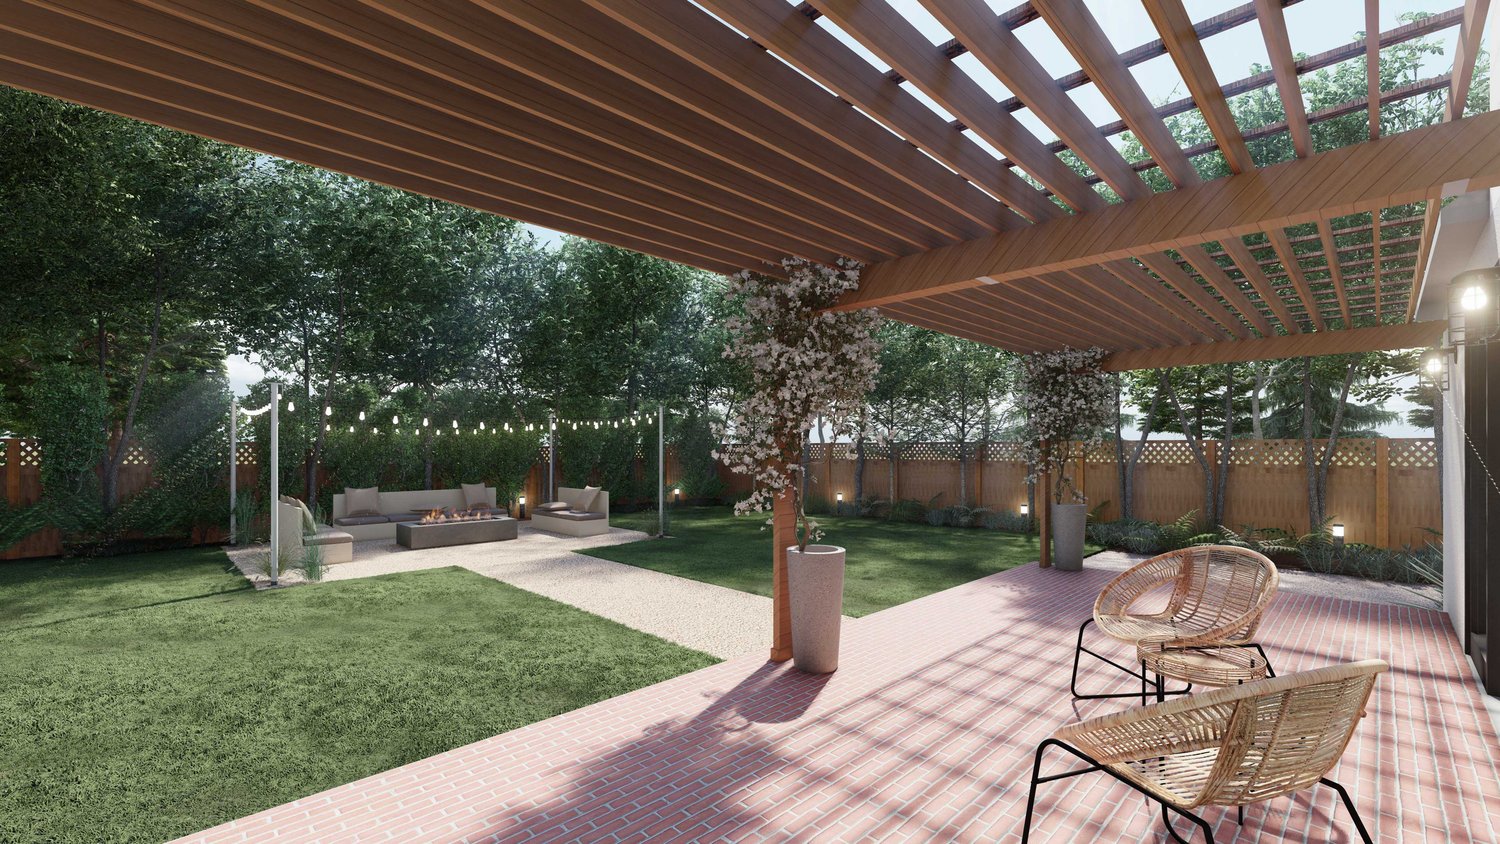 San Antonio backyard with pergola over patio seating area in the foreground, lawn and fire pit seating area with string lights in the background